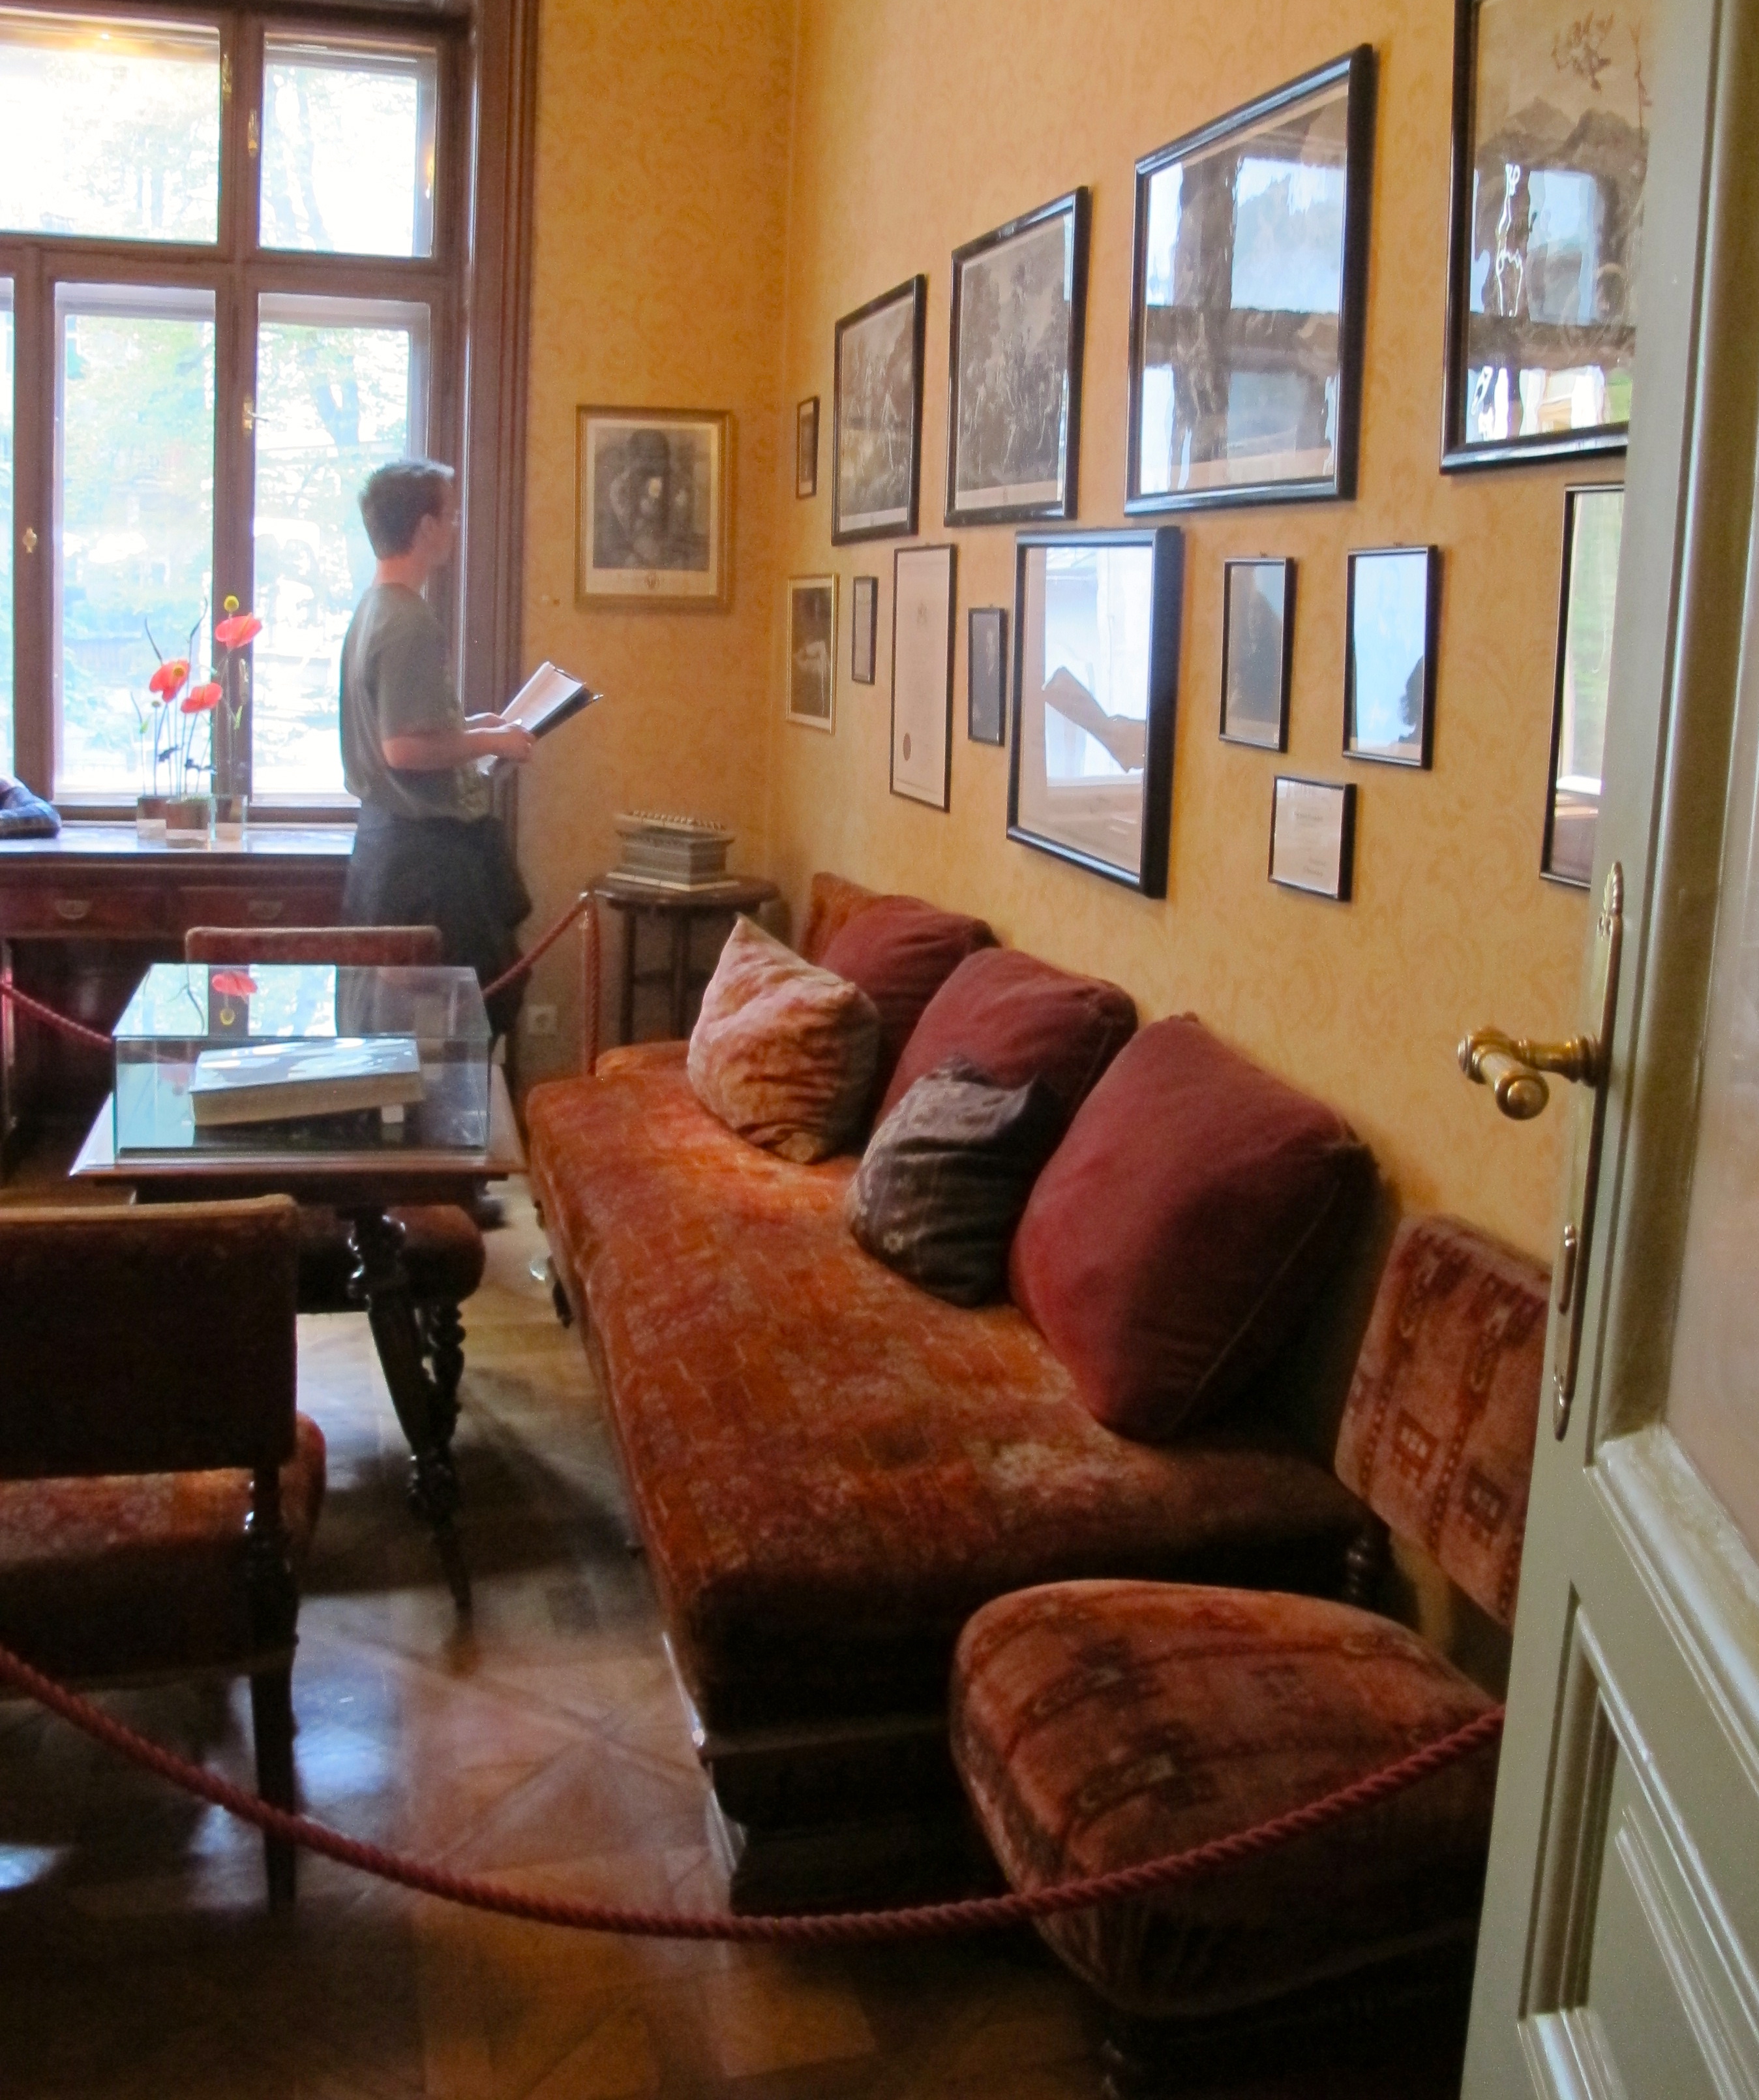 Waiting room of Sigmund Freud's office in Vienna. The couch, however, is not the one Freud used to analyze his patients. 